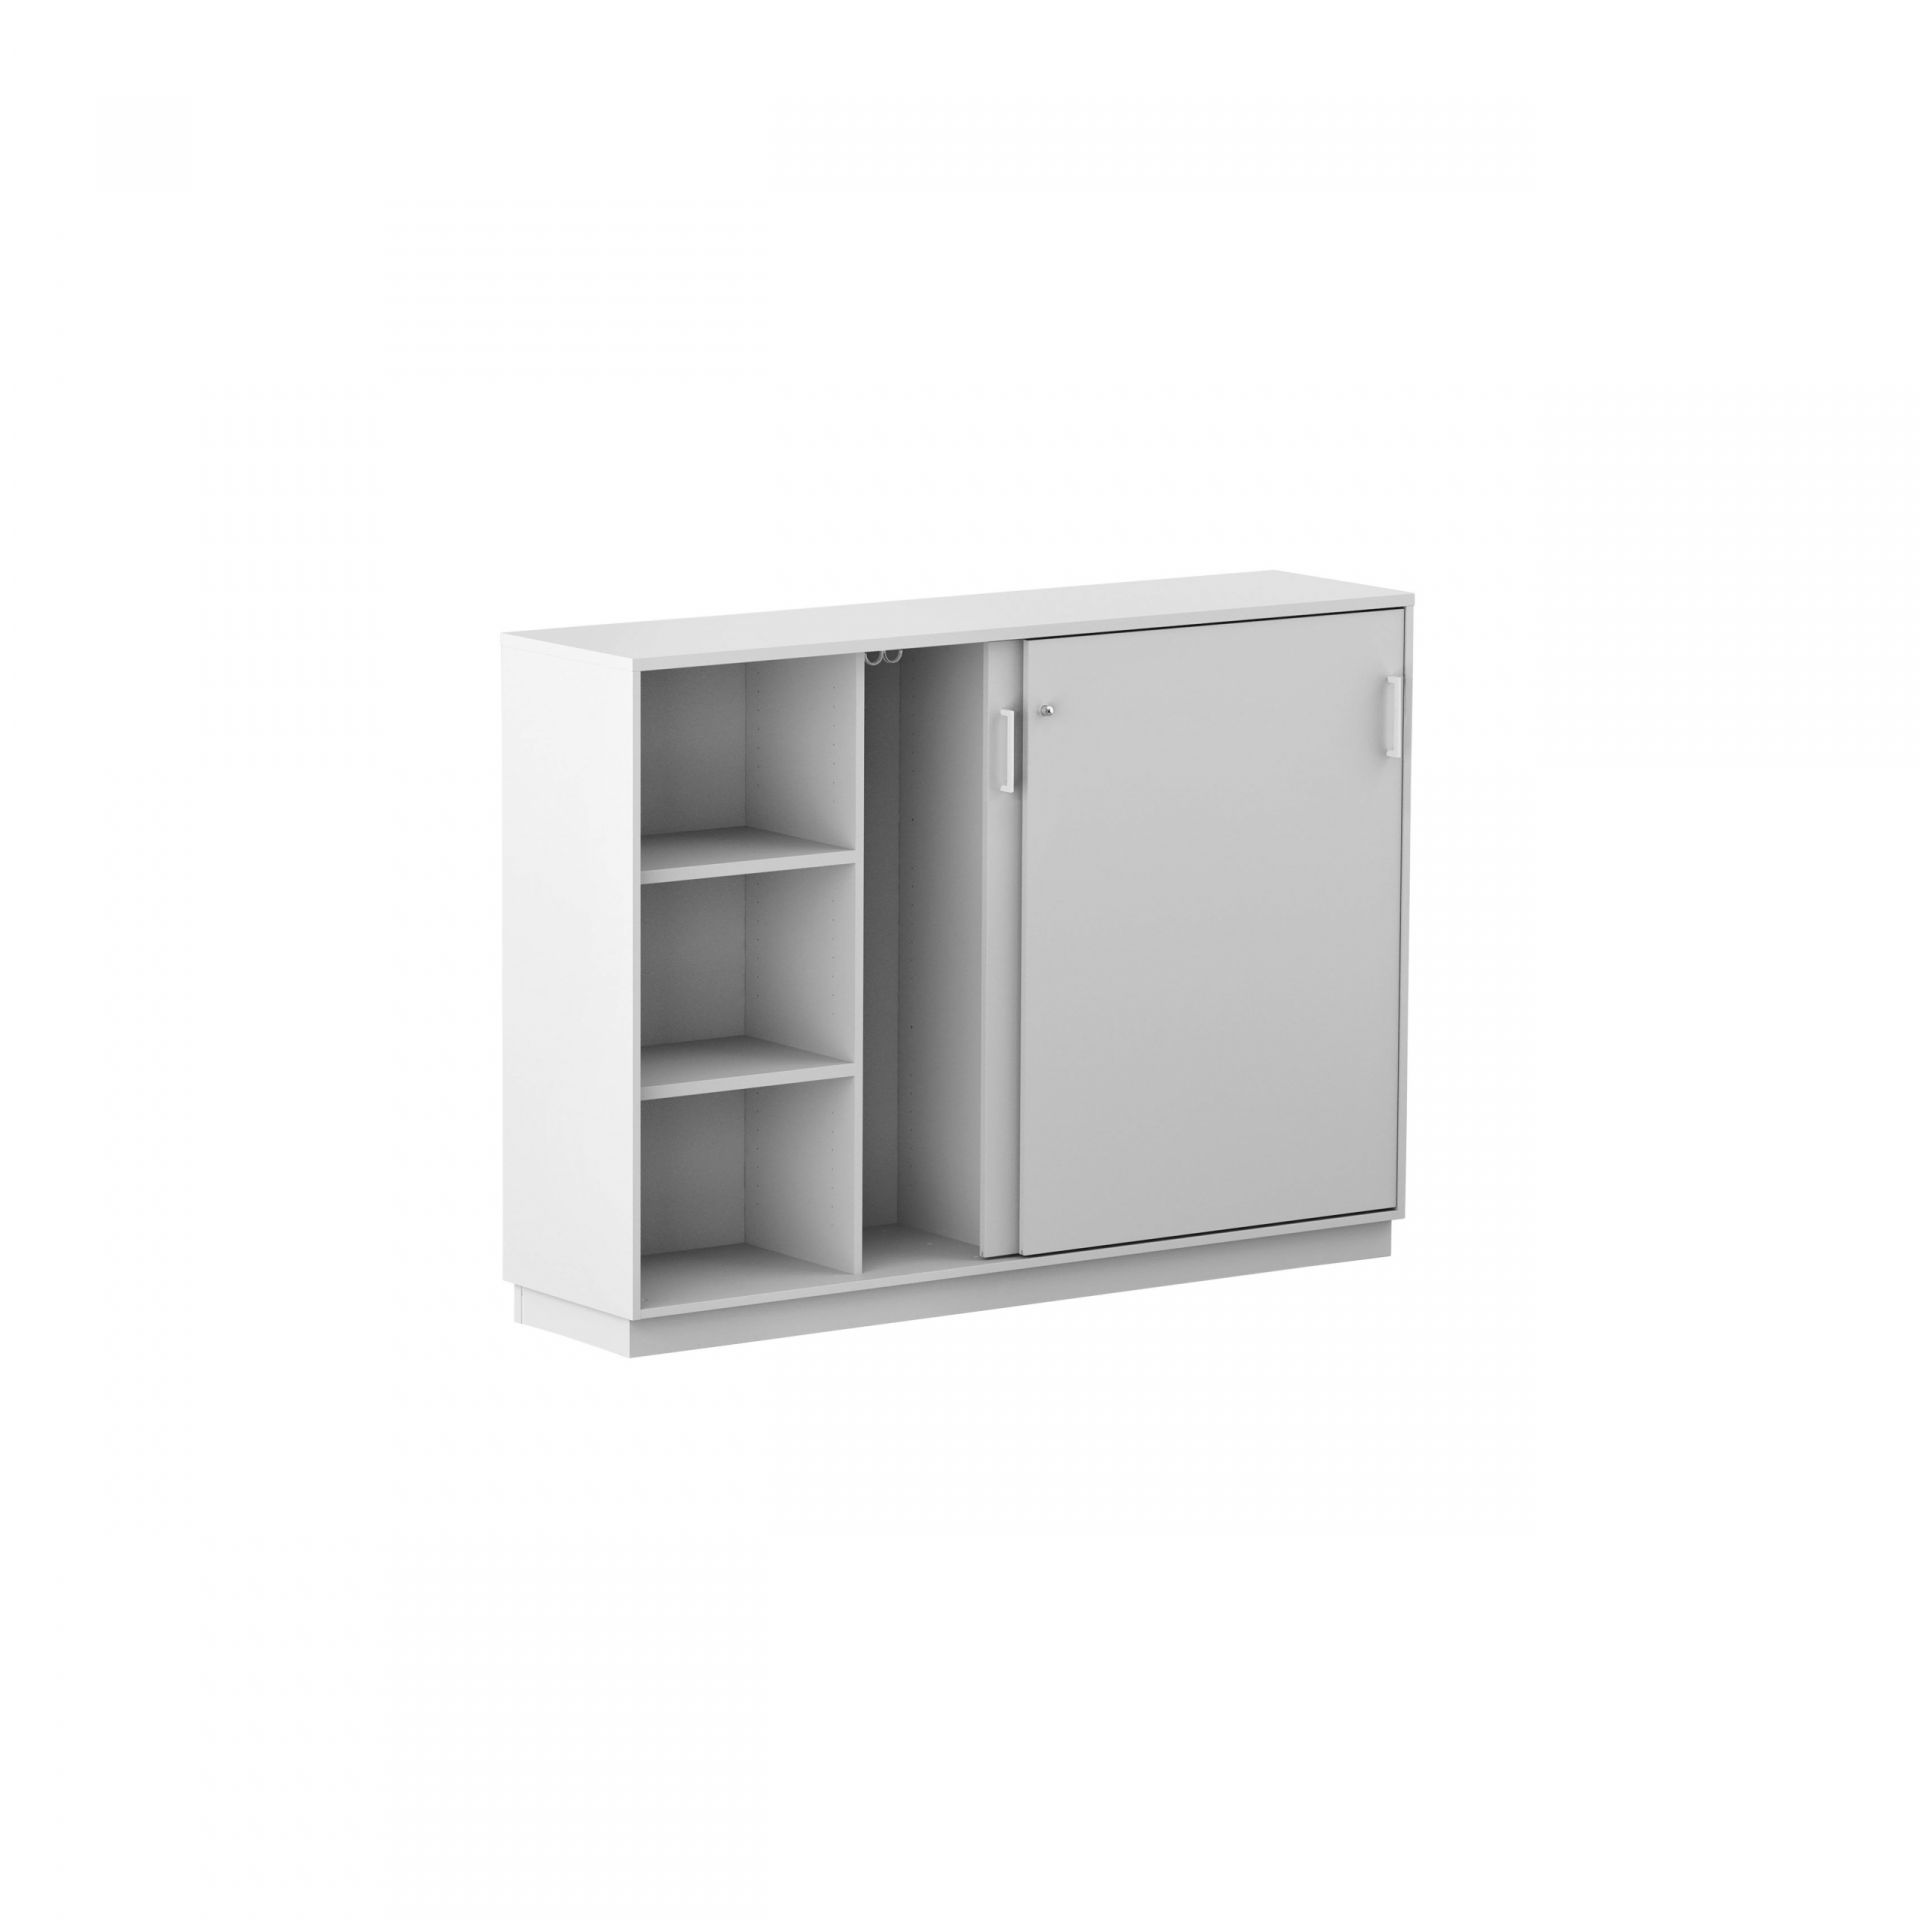 Hold Sliding-door cabinet product image 4